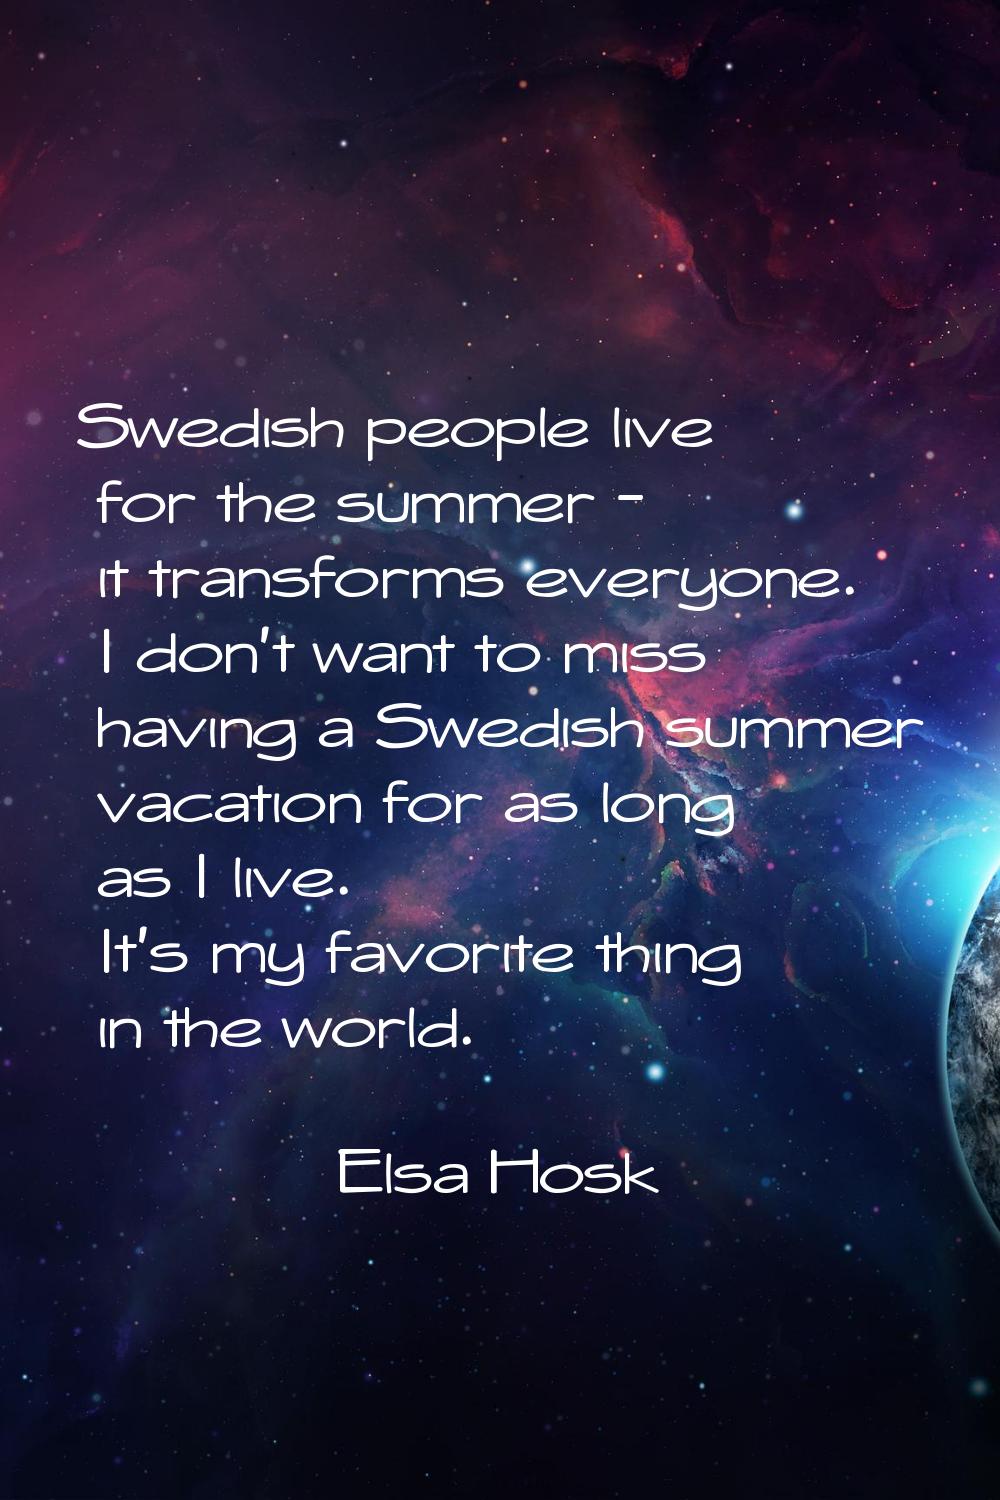 Swedish people live for the summer - it transforms everyone. I don't want to miss having a Swedish 